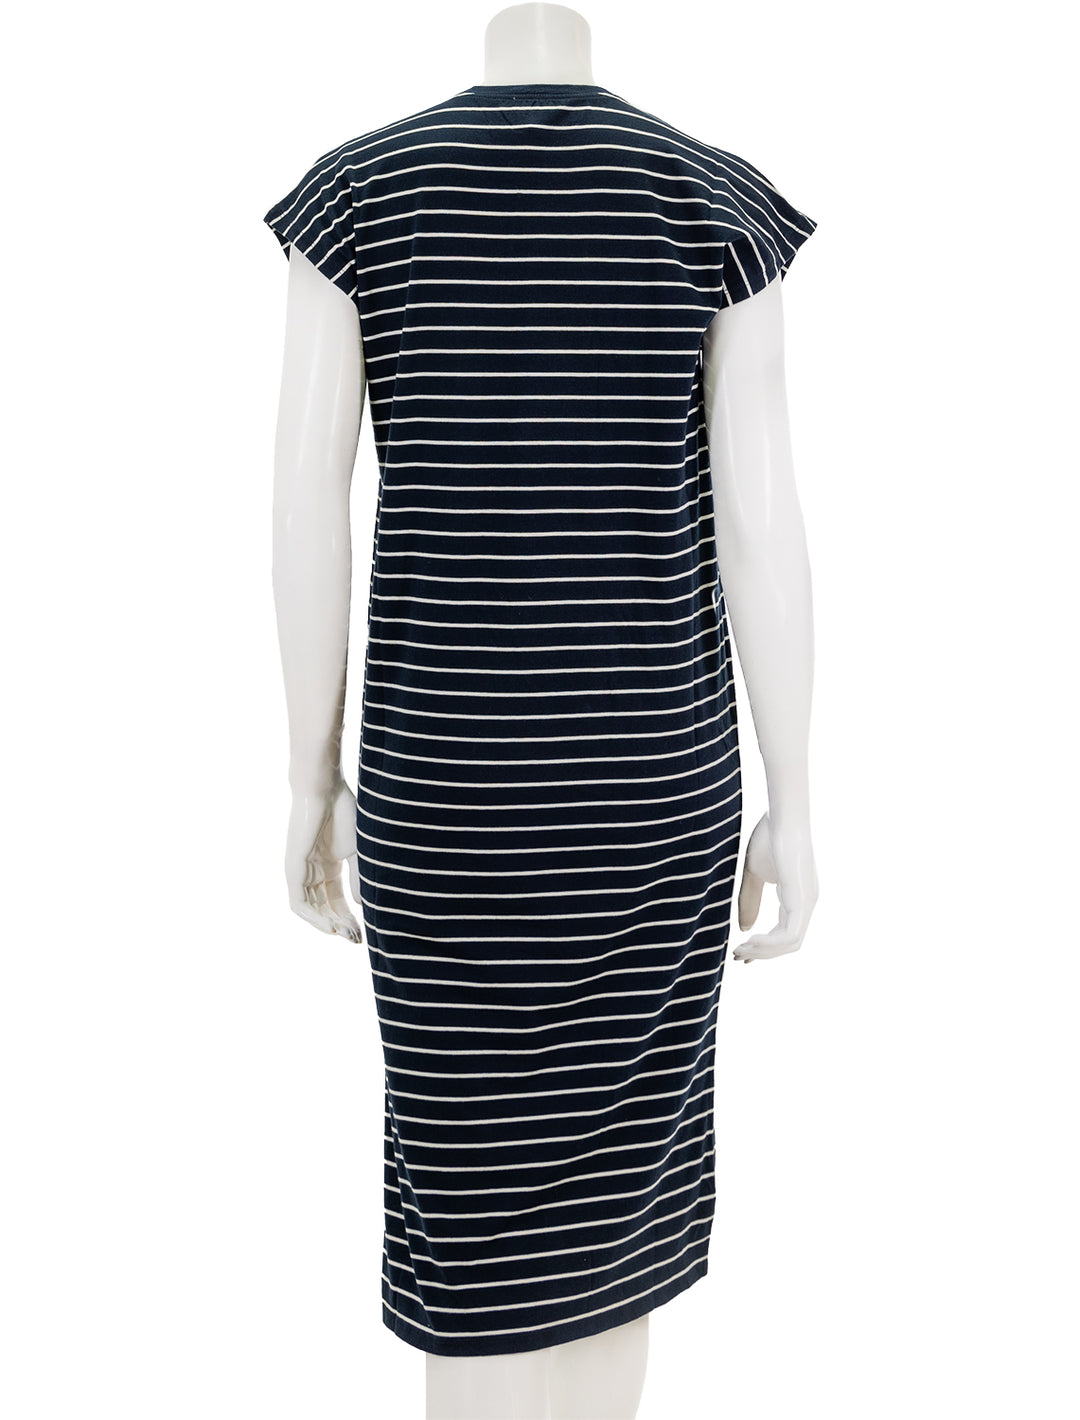 Back view of KULE's the honor dress in navy and cream stripe.